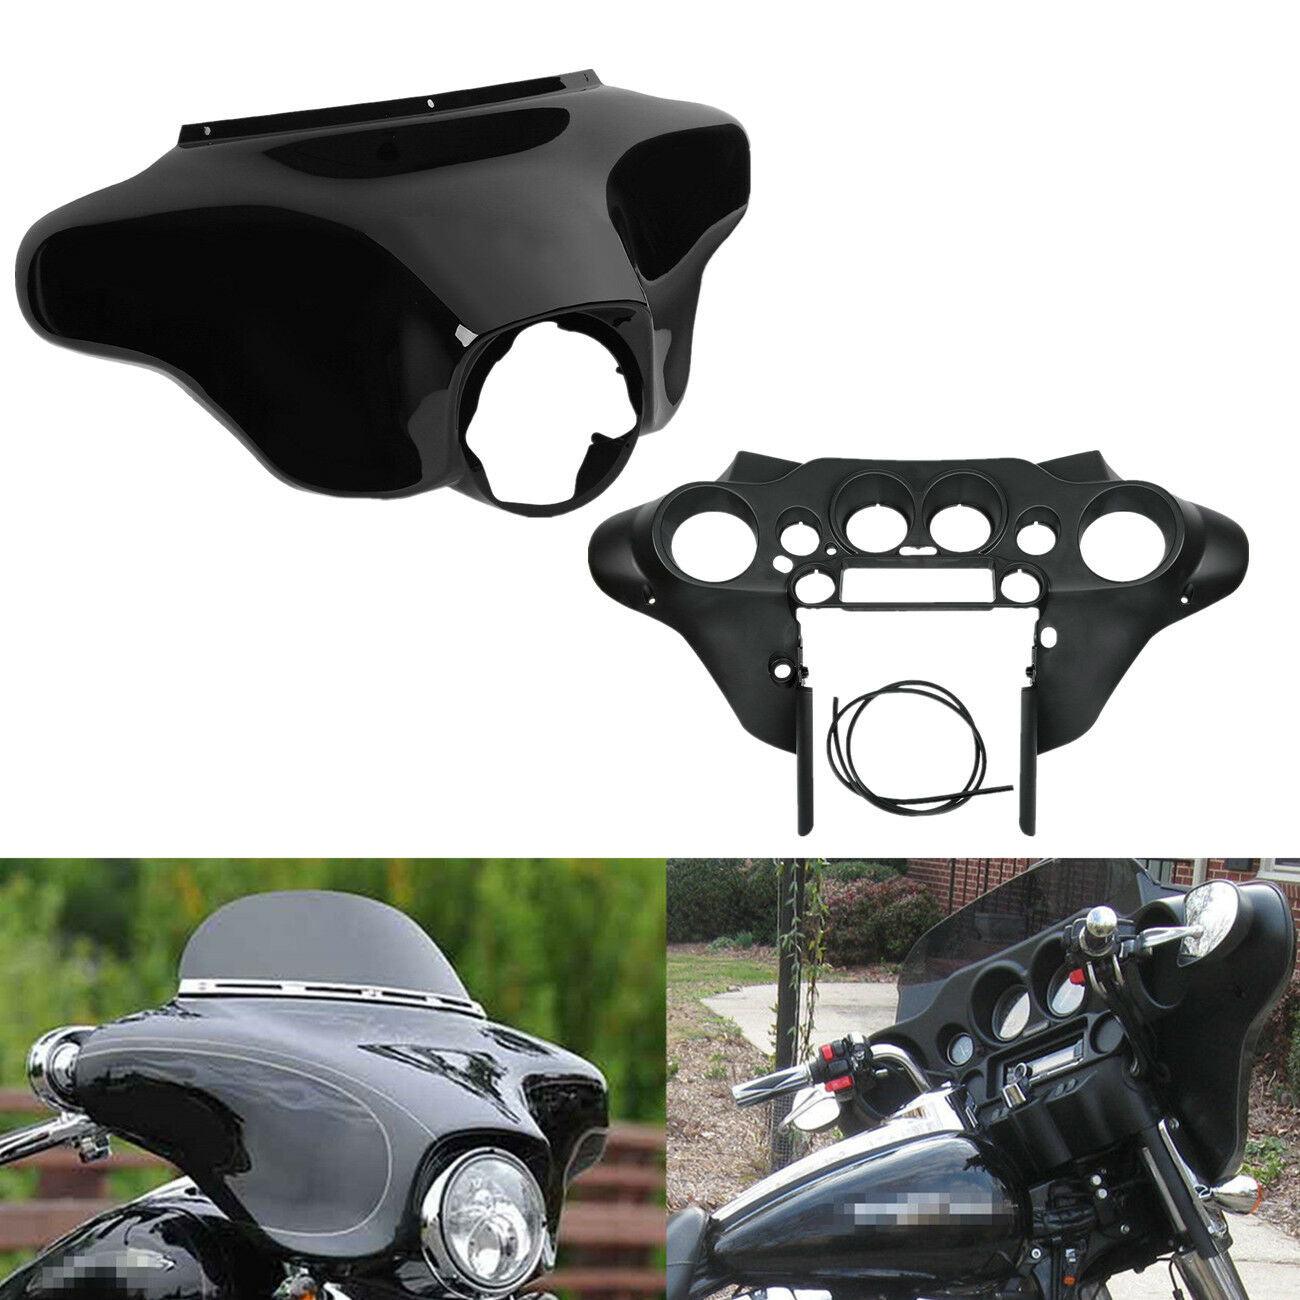 Batwing Inner & Outer Cowl Fairing For Harley Electra Street Glide FLH 1996-2013 - Moto Life Products